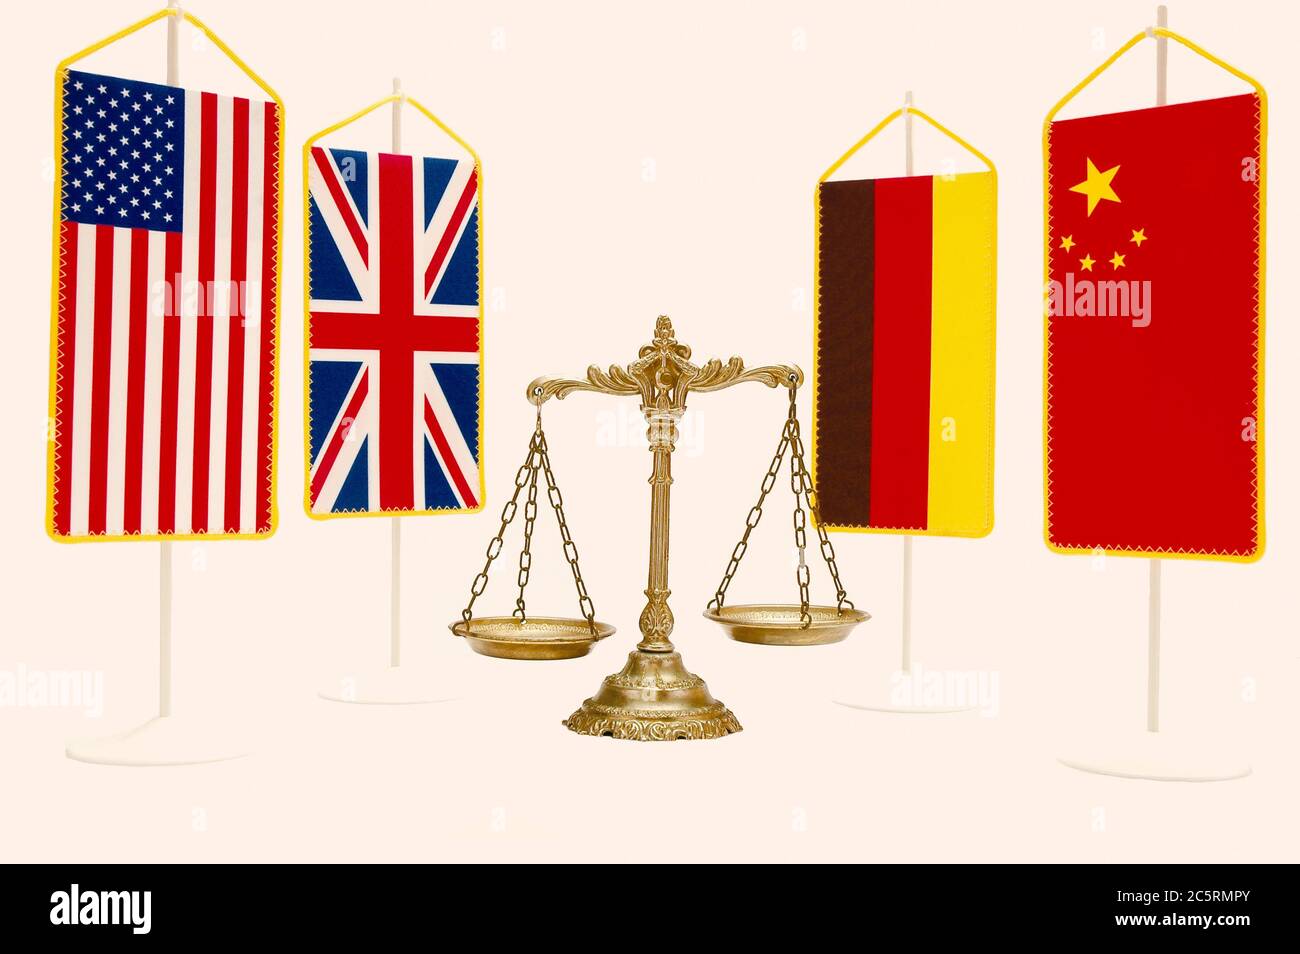 Decorative Scales of Justice with National flag of United States of America, United Kingdom, China and Germany Stock Photo